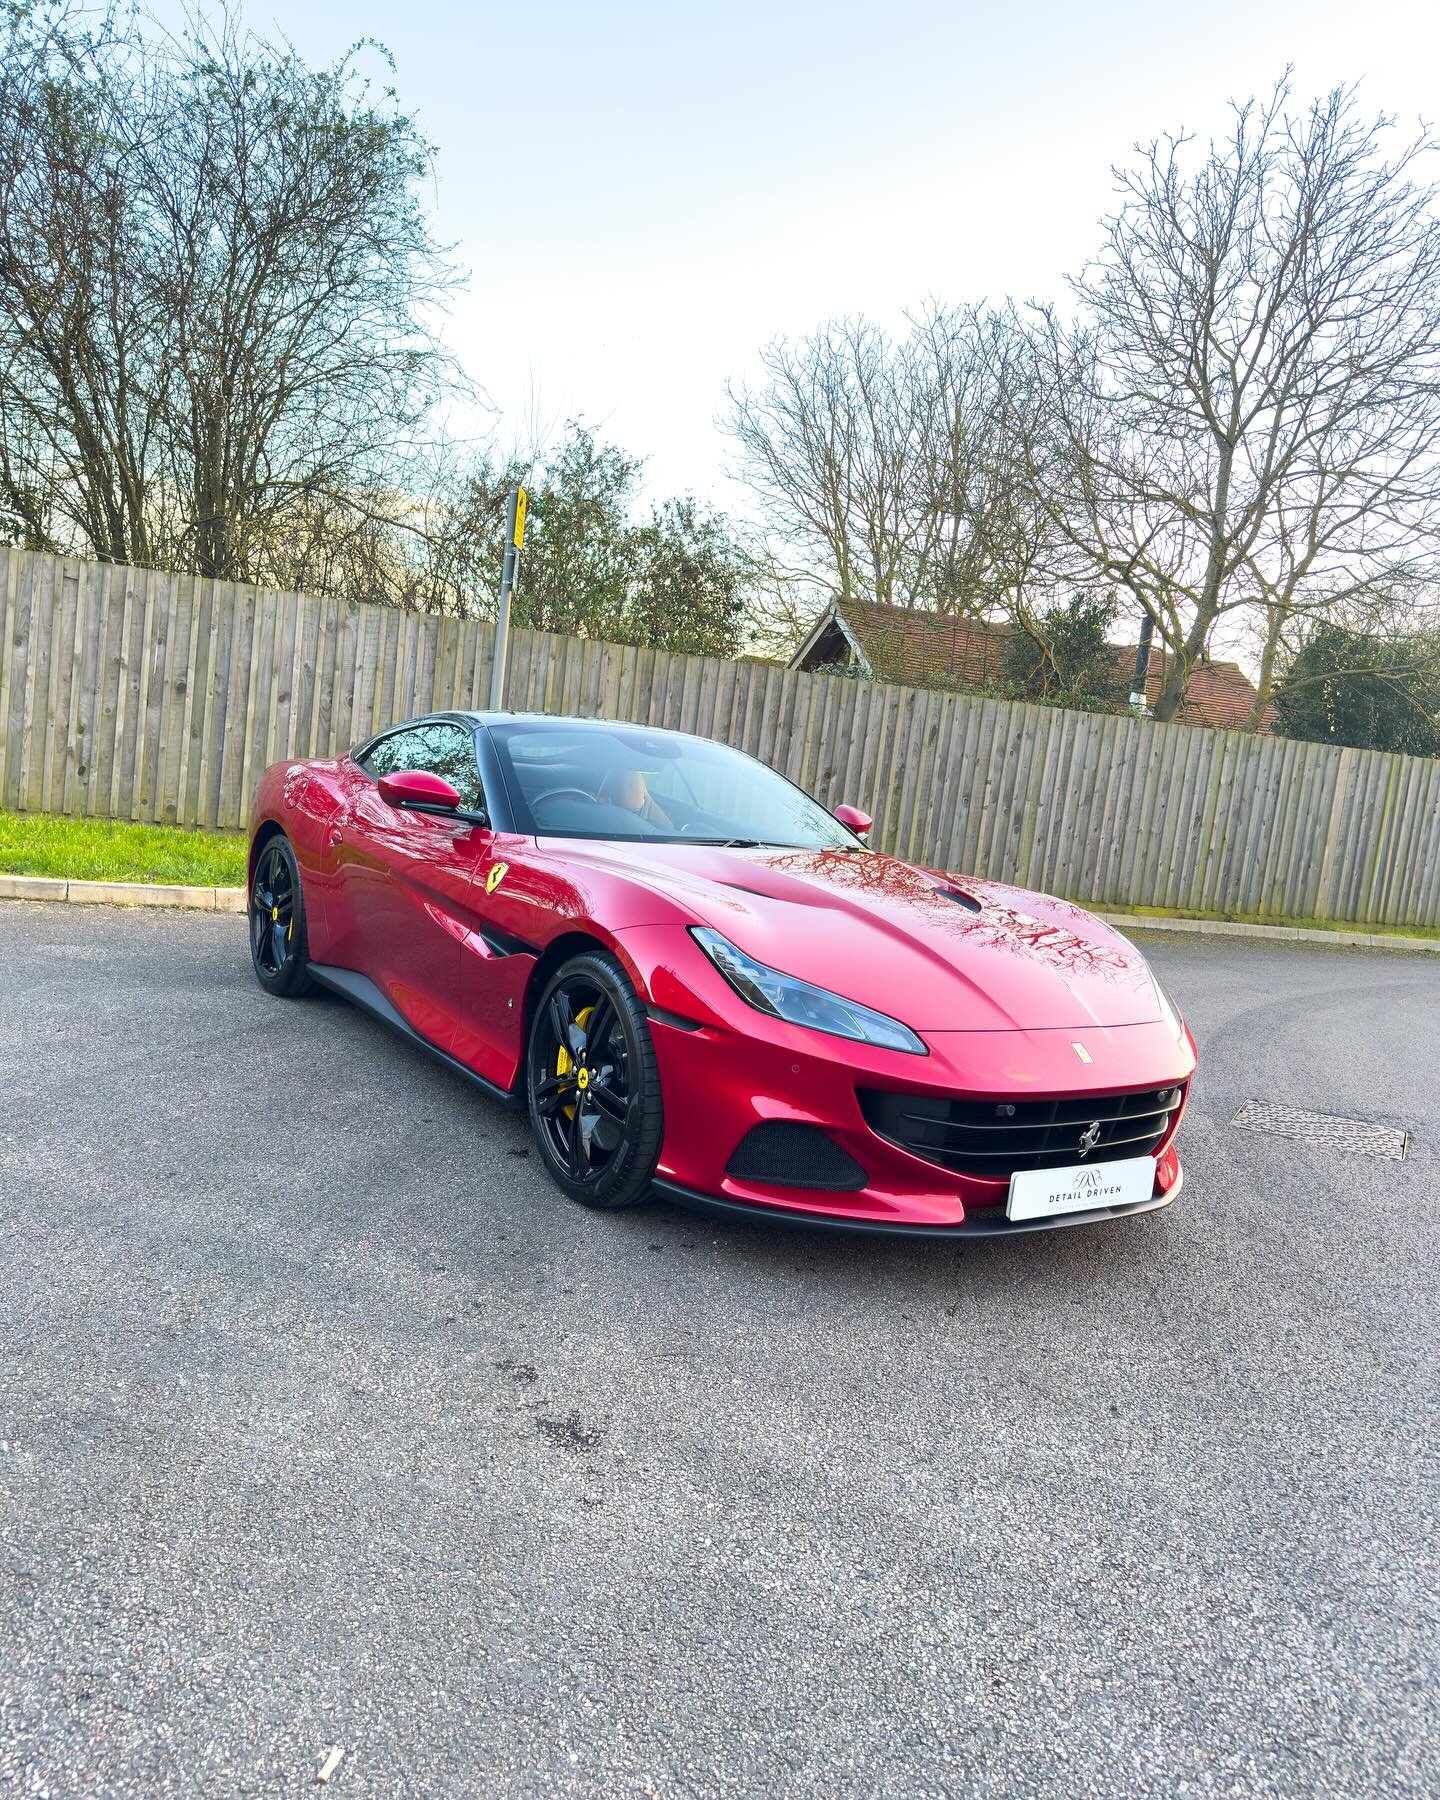 It&rsquo;s #ferrarifriday! This Ferrari Portofino returned for some visual improvements! After we PPF&rsquo;d the entire car last year, the client decided they wanted to enhance the appearance further. We removed the PPF from the roof, wrapped it in 